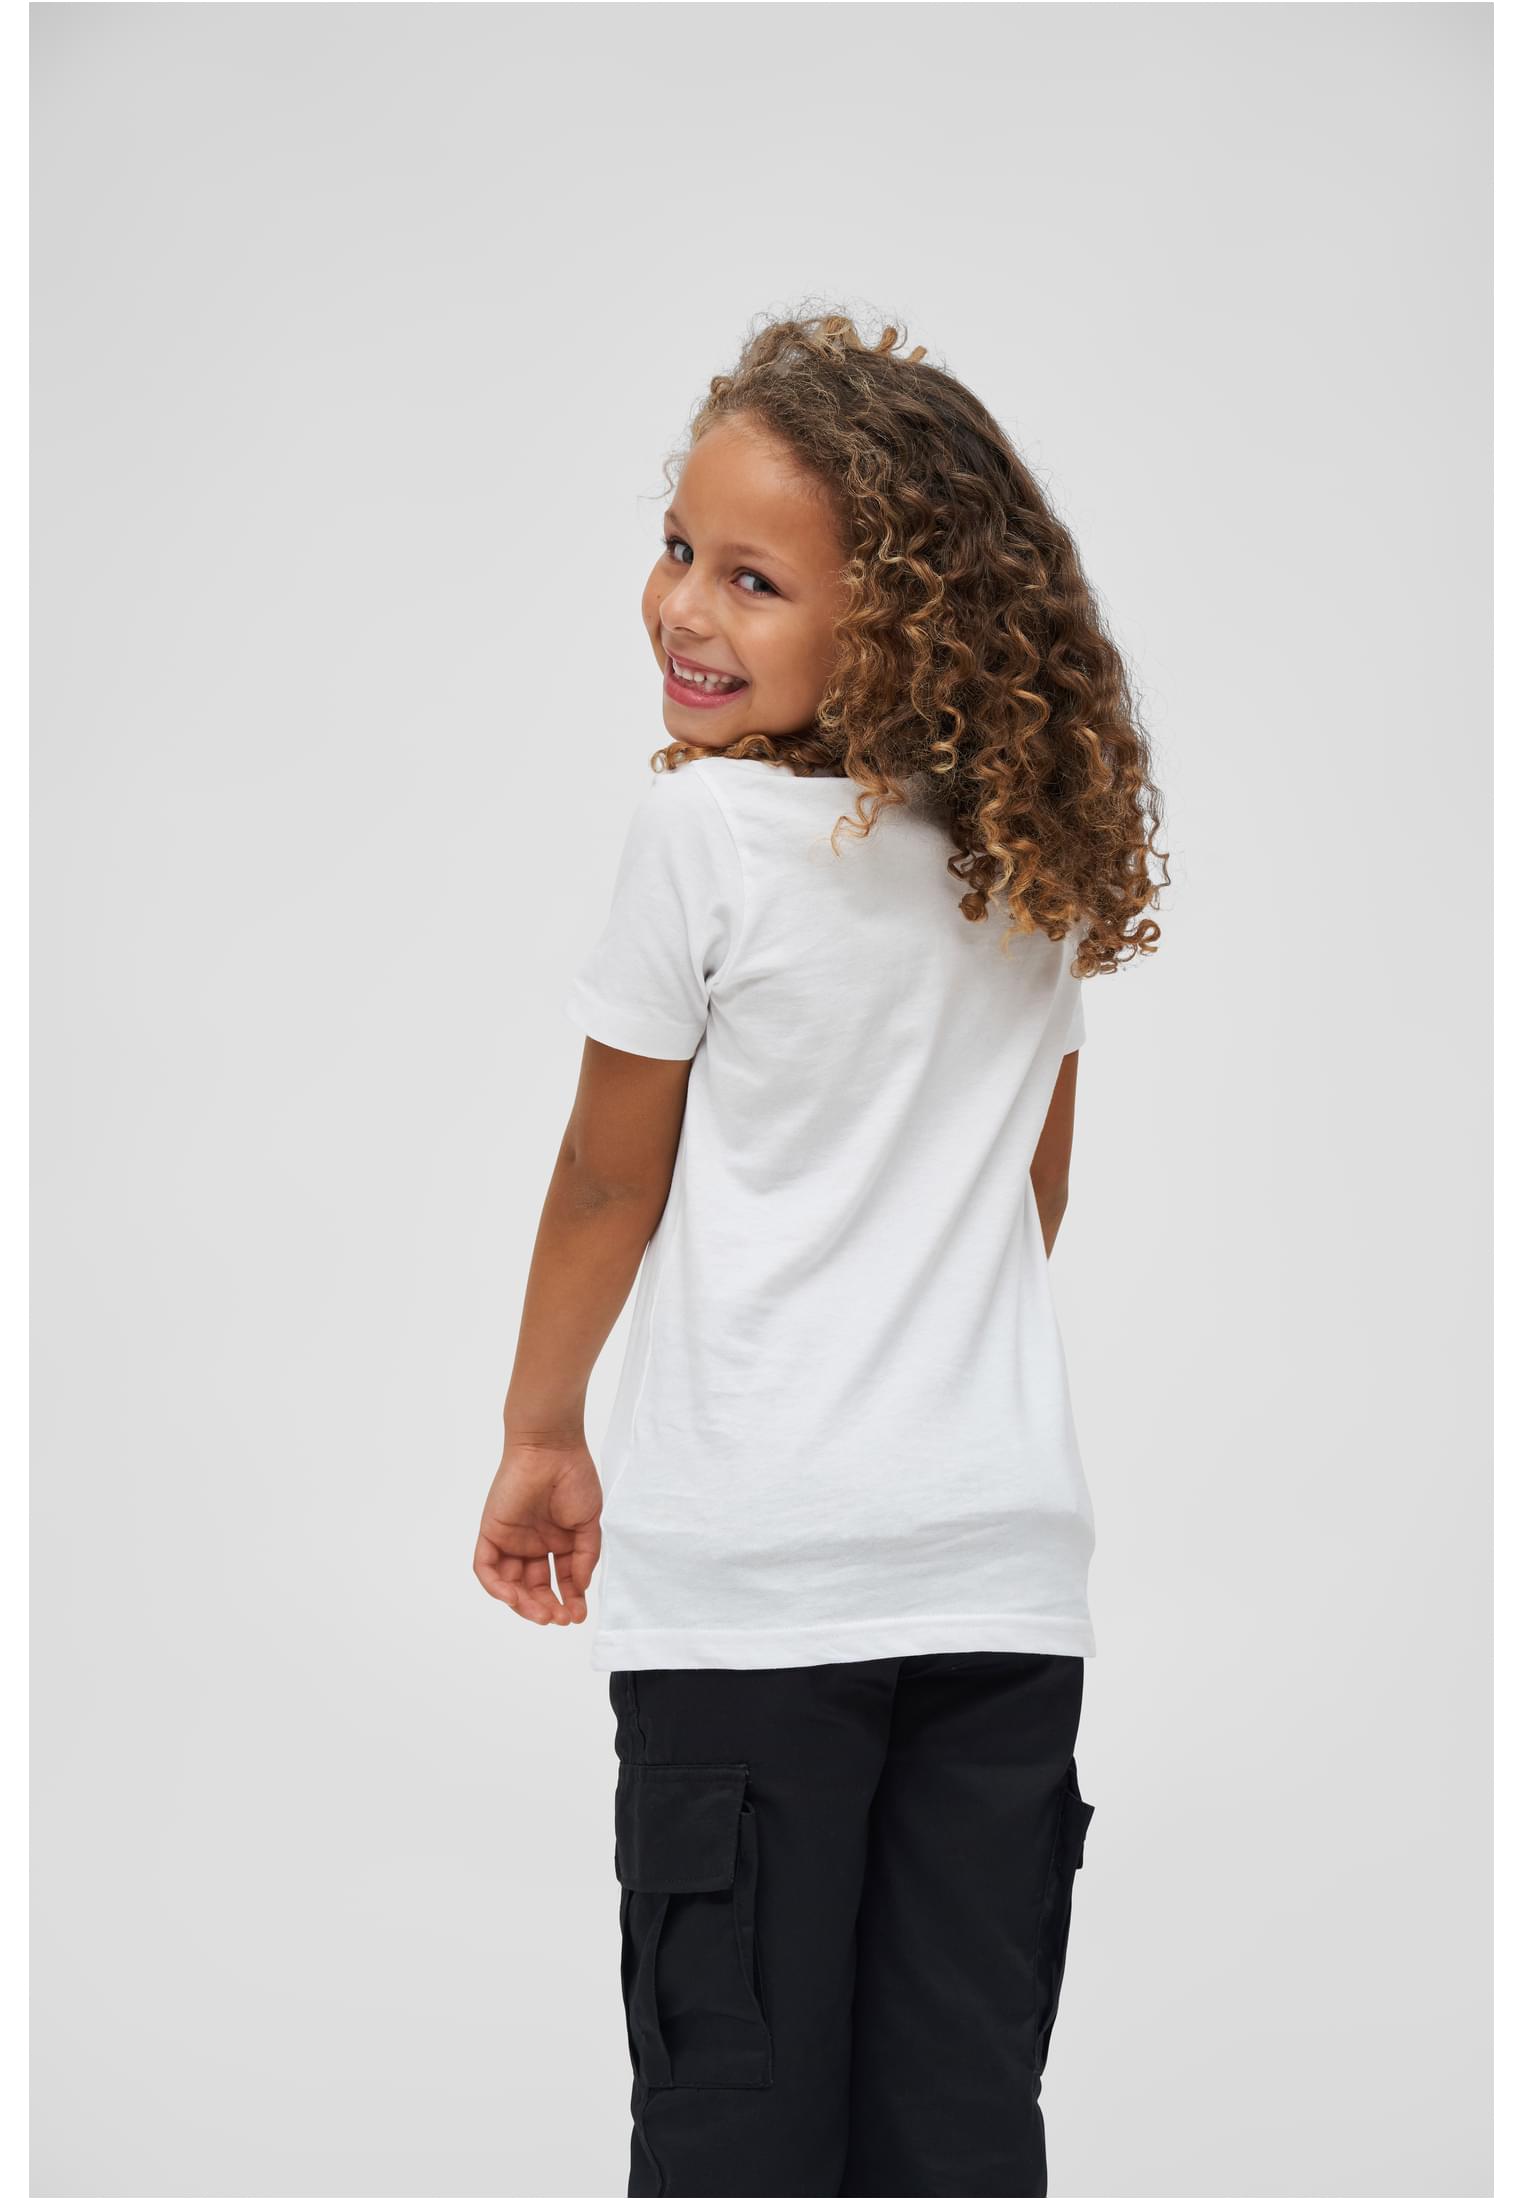 T-Shirts Kids T-Shirt in Farbe white